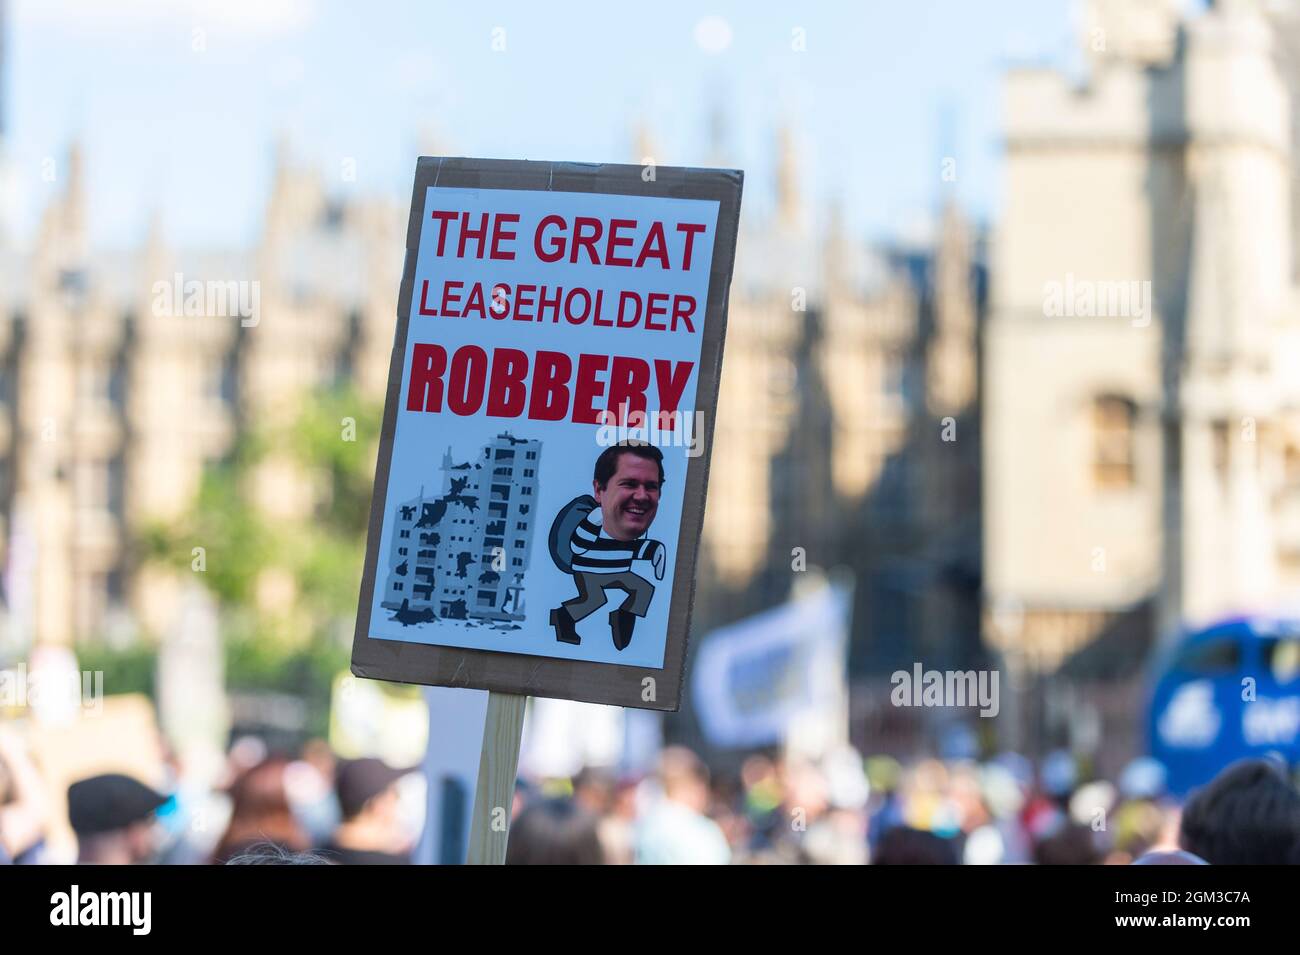 London, UK.  16 September 2021.  A sign at a Leaseholders Together Rally in Parliament Square.  Organised by End Our Cladding Scandal campaign together with the National Leasehold Campaign (NLC) and charity Leasehold Knowledge Partnership, people protested at restrictions to leasehold rights as well as the current cladding crisis.   Credit: Stephen Chung / Alamy Live News Stock Photo